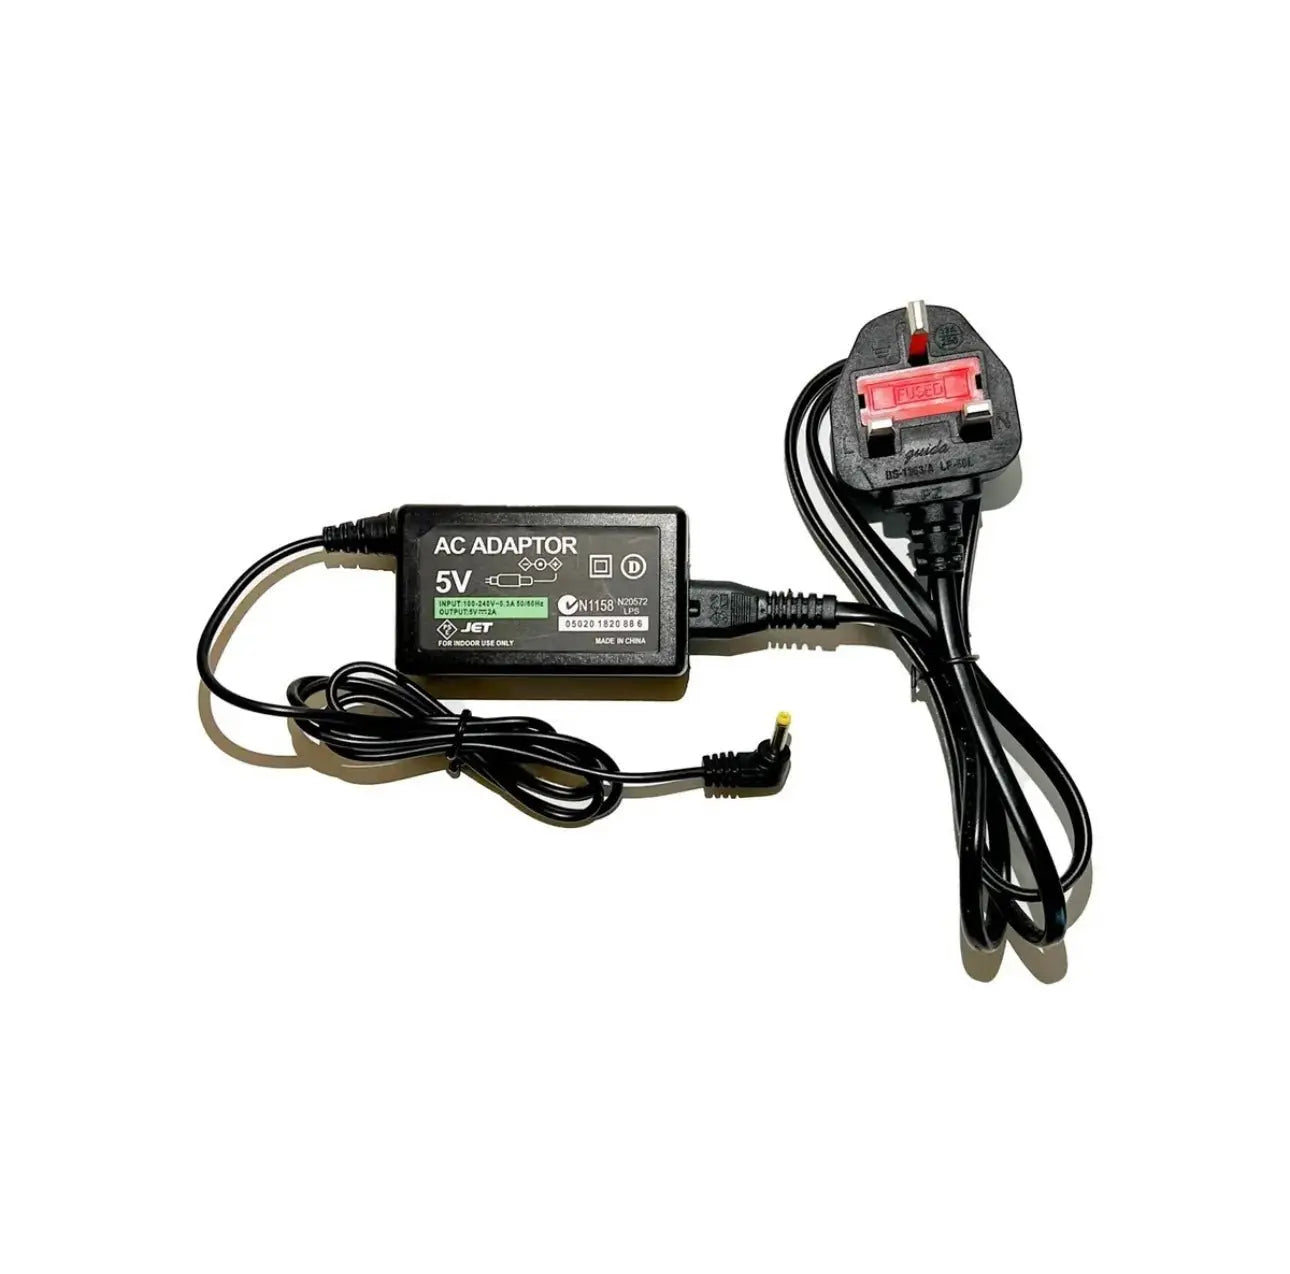 High-Quality PSP Power Supply AC Adapter with Power Lead Cable Plug - GameBlock